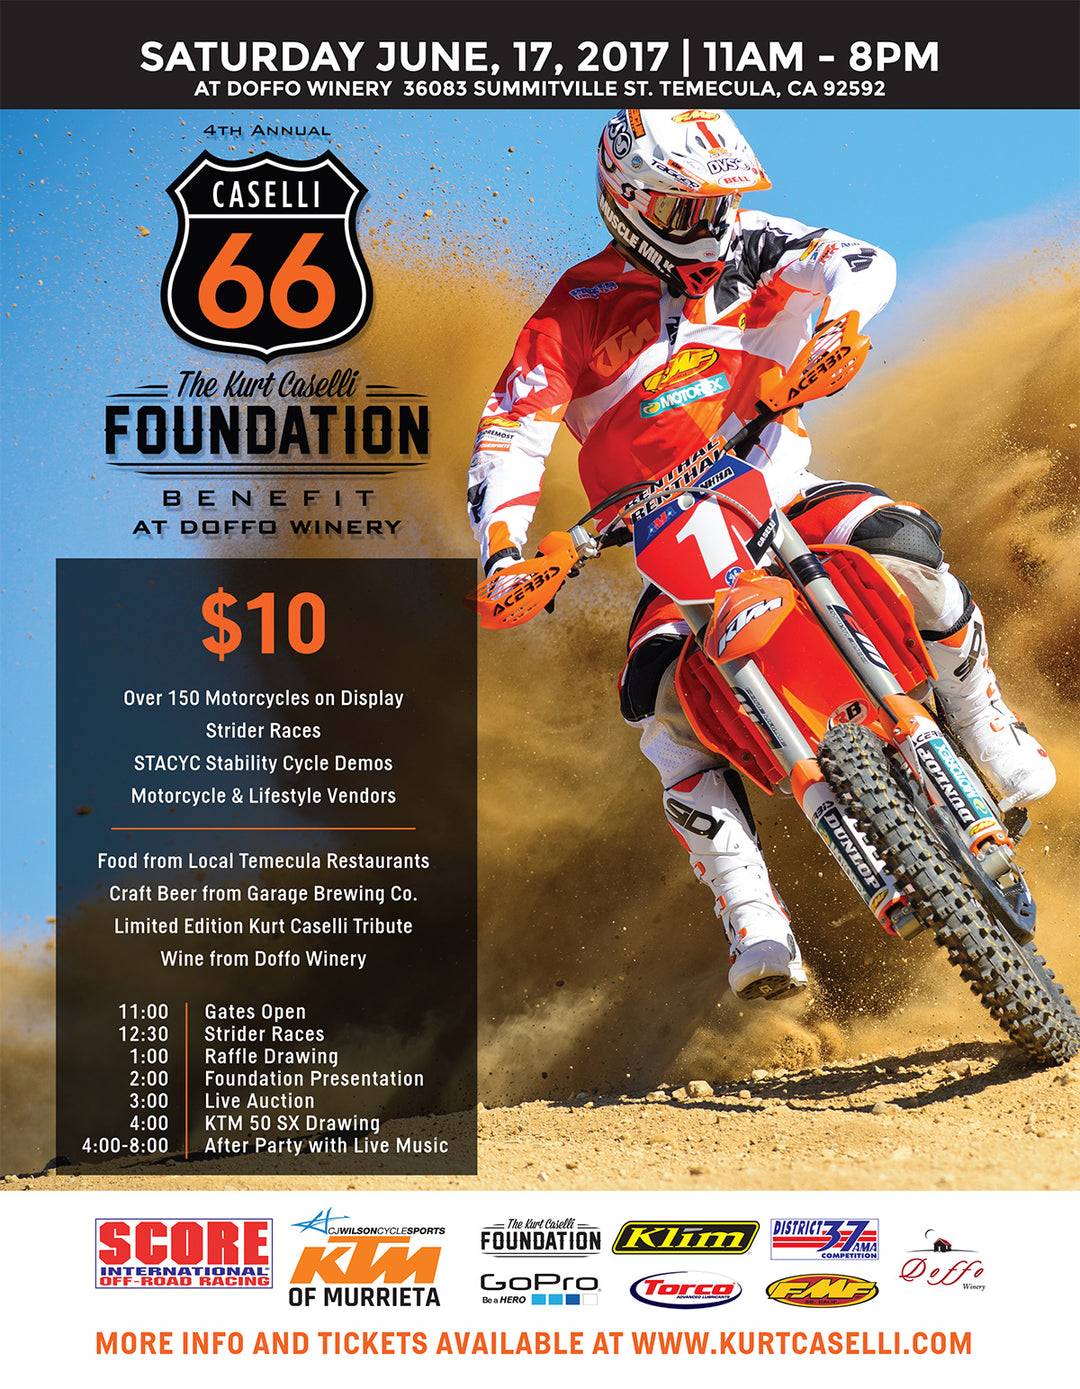 Saturday, June 17 - 4th Annual MotoDoffo Event Benefiting The Kurt Caselli Foundation Hosted by Doffo Winery